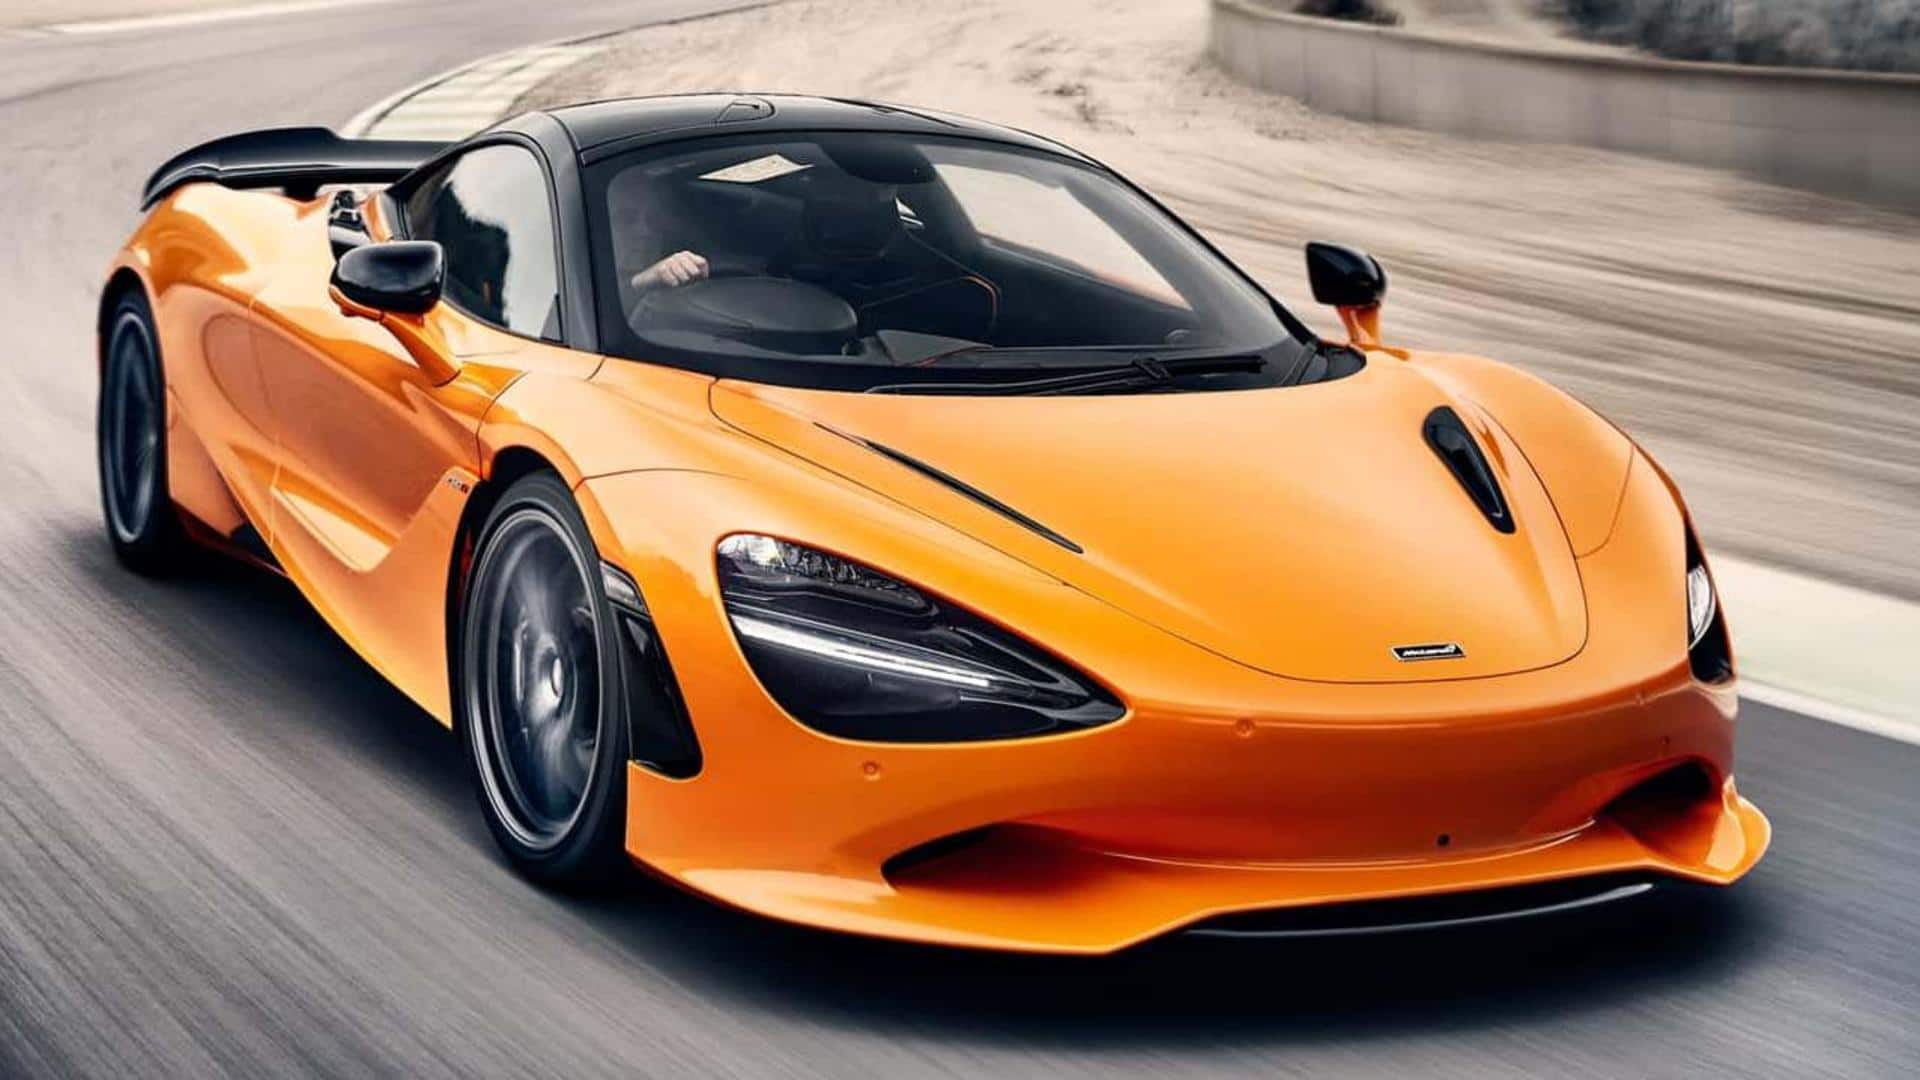 Differences between McLaren's 750S and 720S supercars, explained